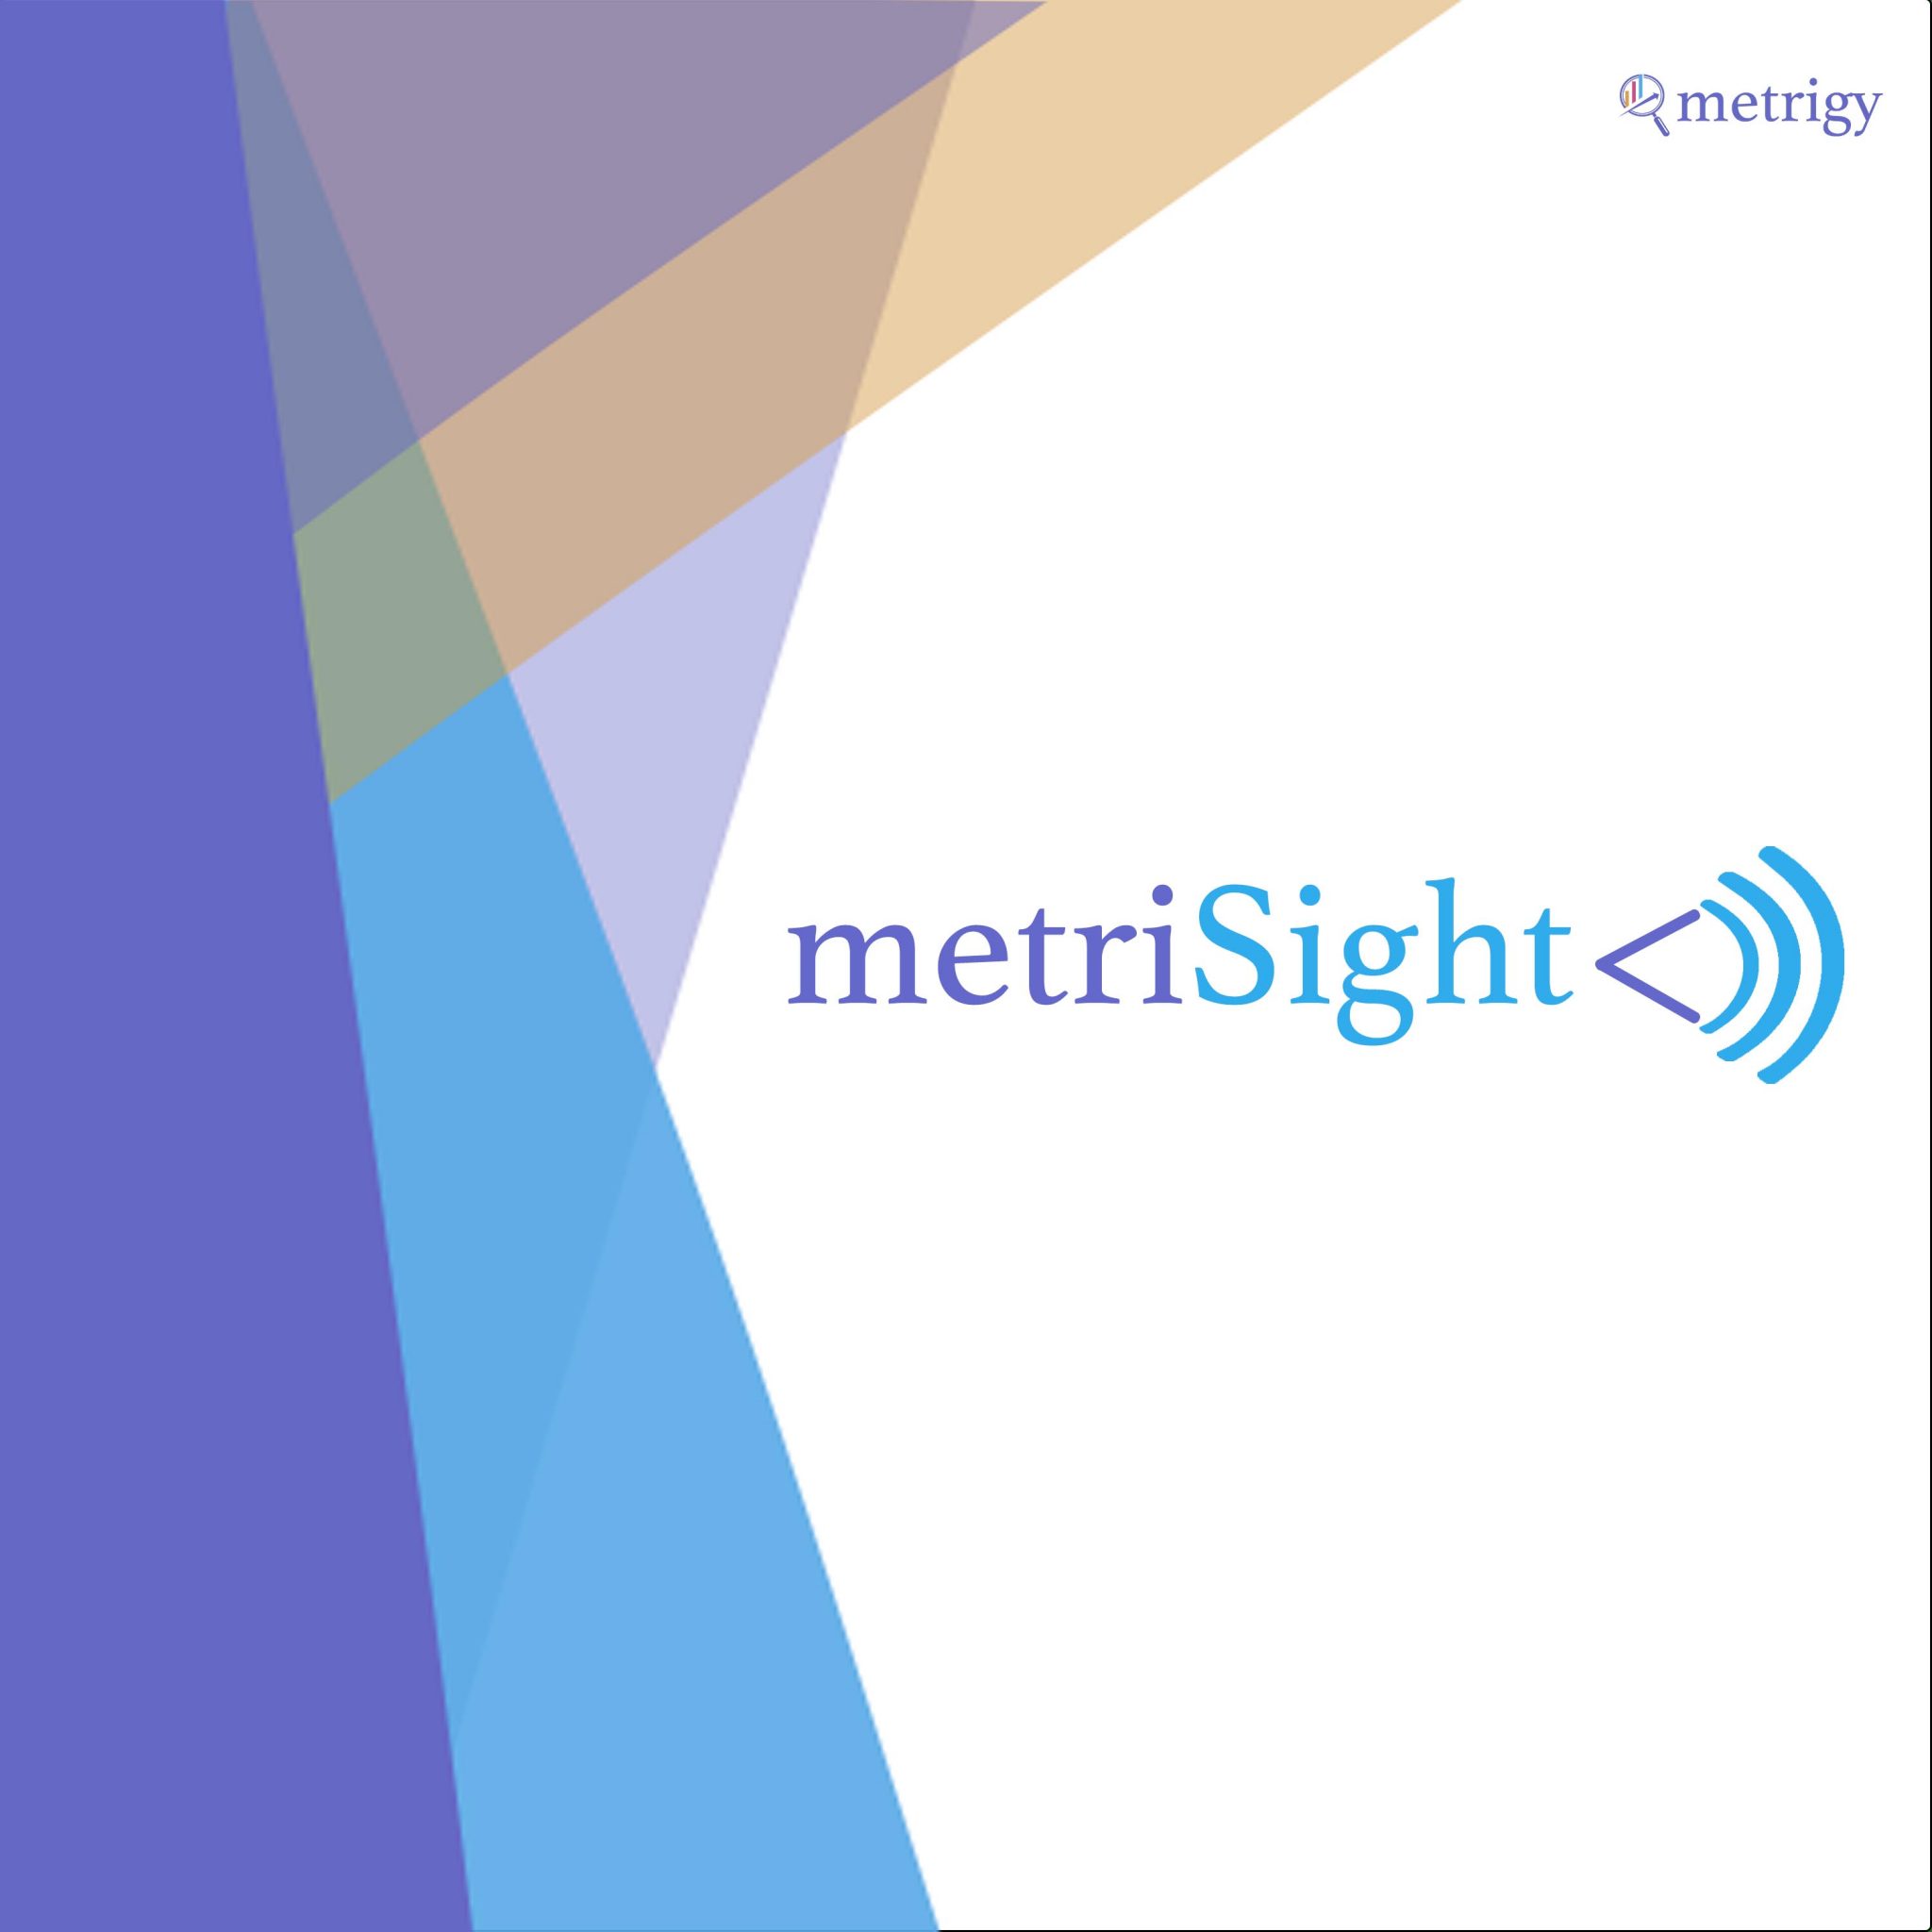 MetriSight Ep.14 - How CTO-Driven Innovation Can Lead to a Tech Spin-Off